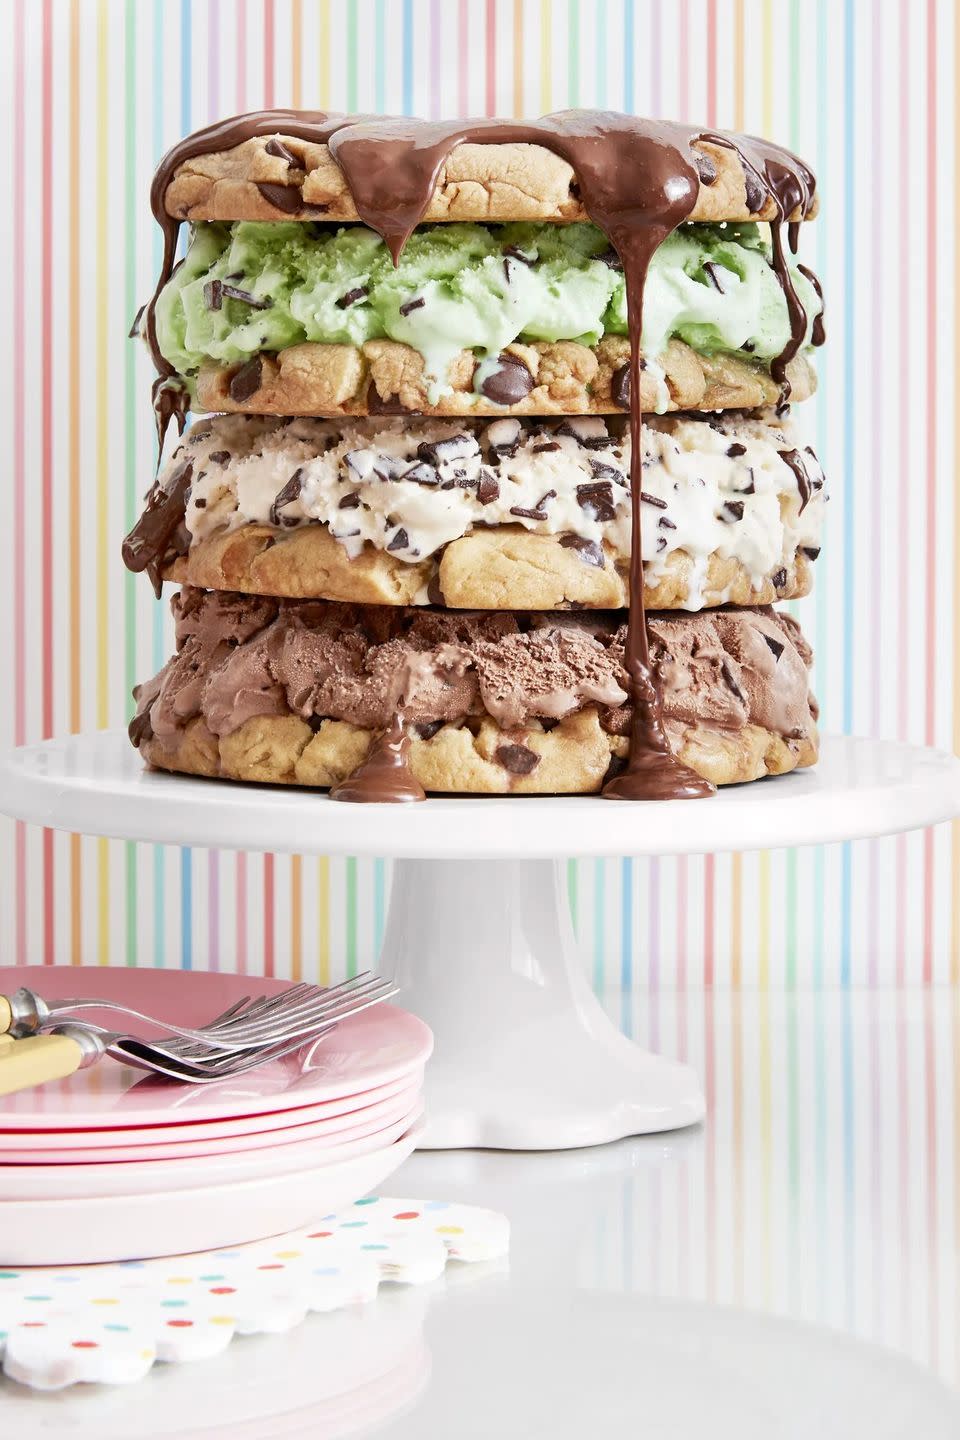 four layer chocolate chip cookie cake chocolate ice cream vanilla chocolate chip and mint chocolate chip ice cream between the layers and chocolate sauce on top